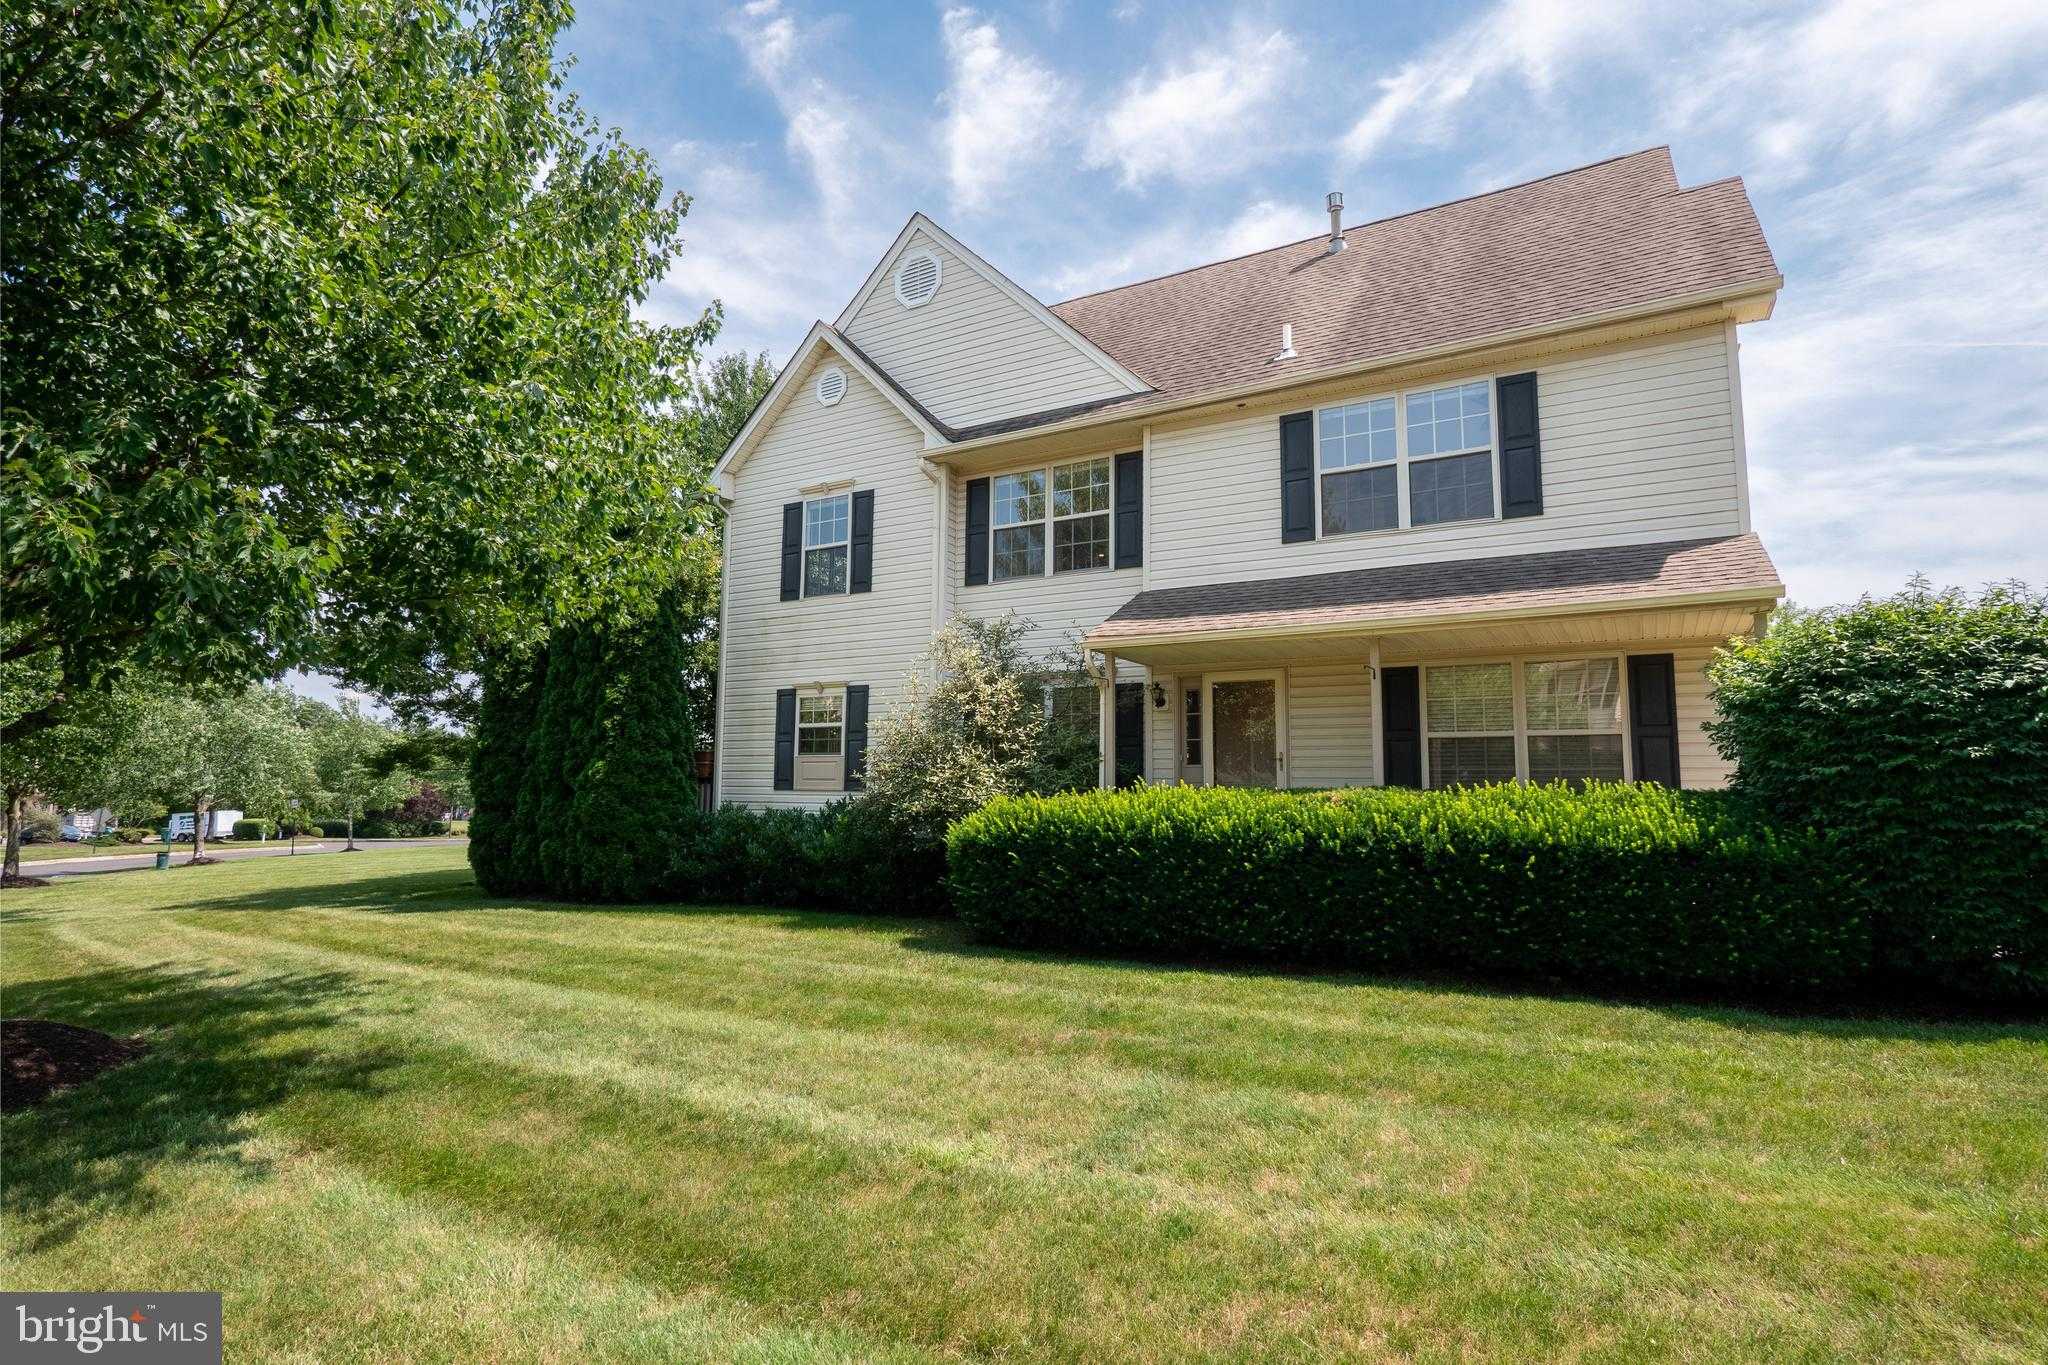 View ROYERSFORD, PA 19468 townhome